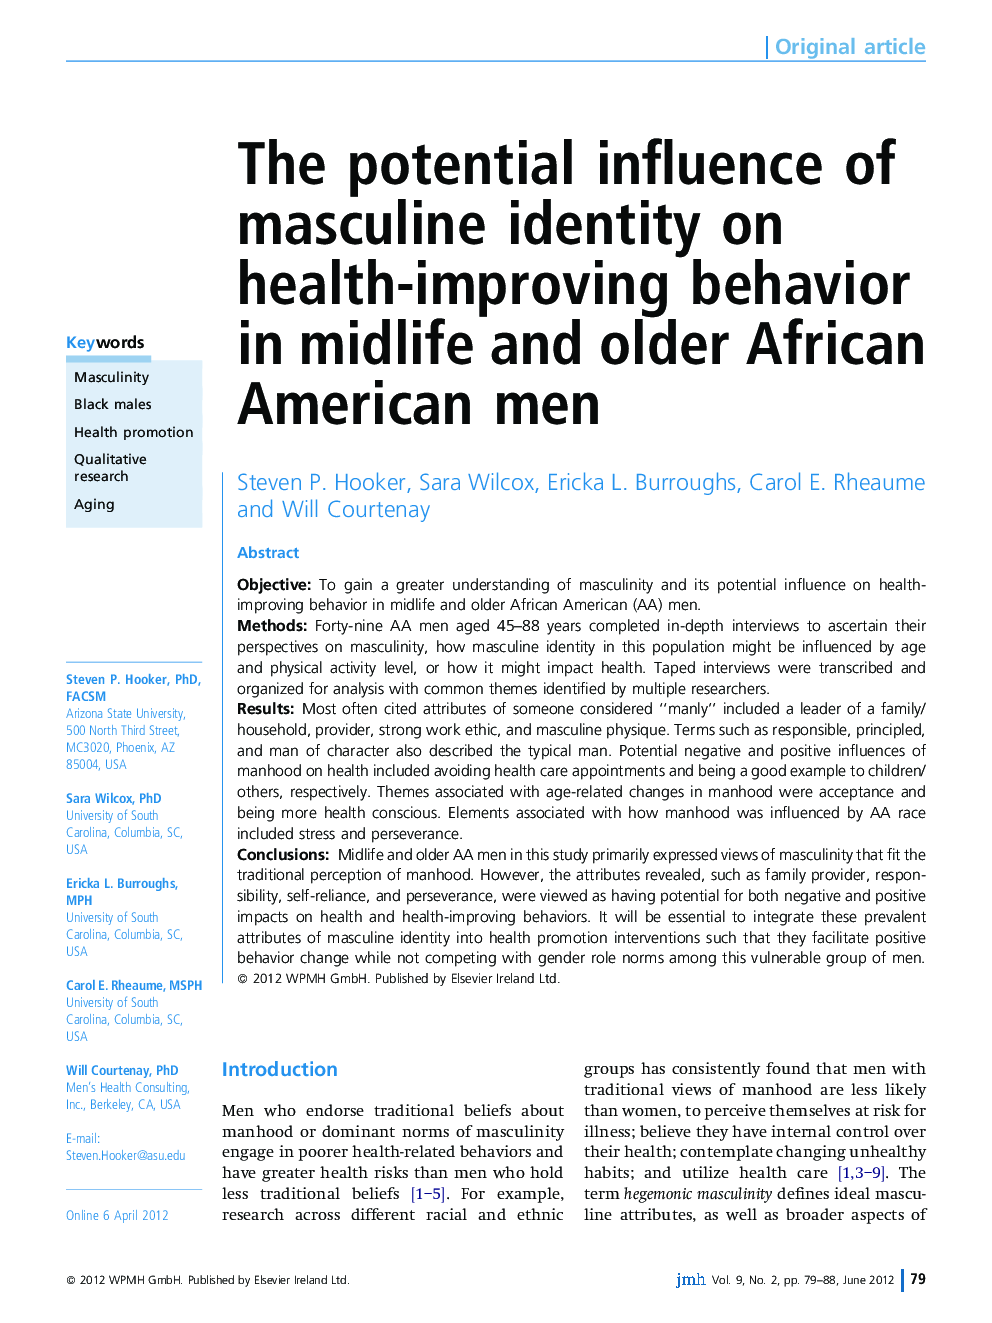 The potential influence of masculine identity on health-improving behavior in midlife and older African American men